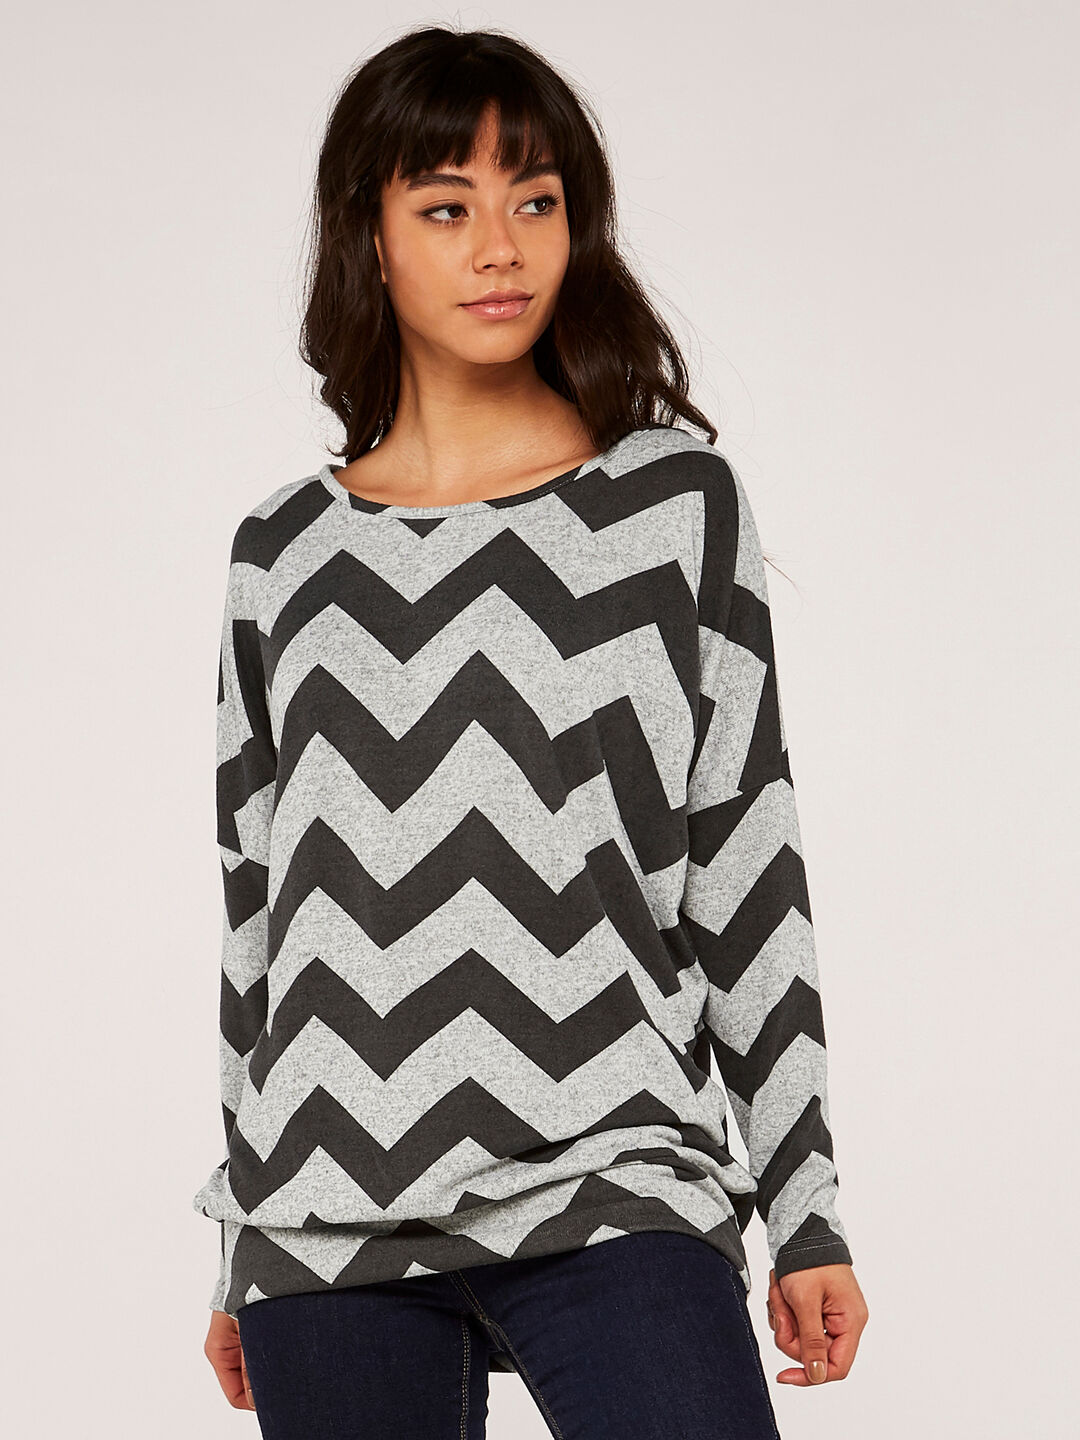 Chevron Soft Touch Batwing Top